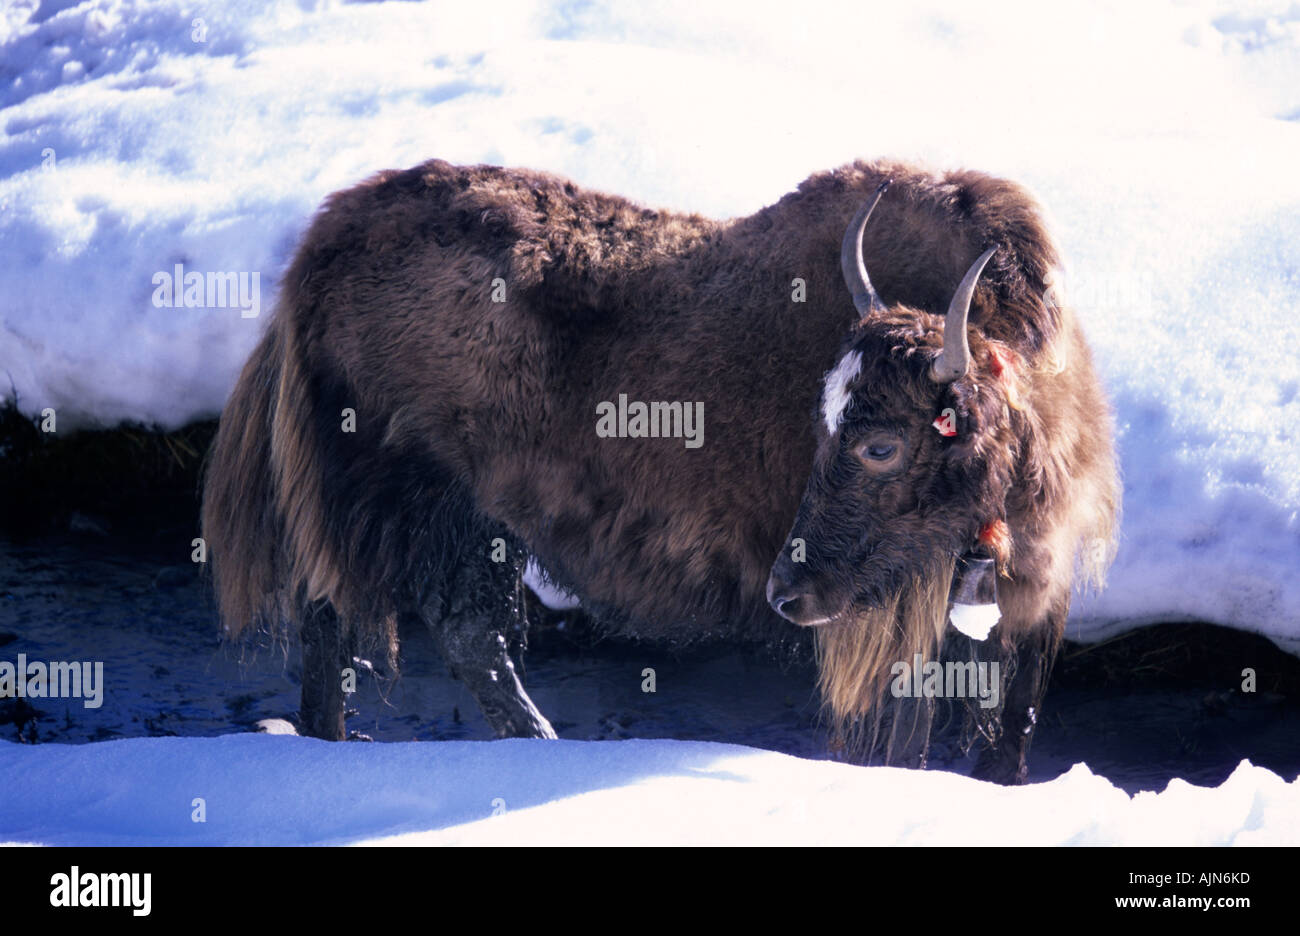 Yak Bos mufus f. grunniens in Manang surroundings Annapurna Conservation Area Nepal Stock Photo